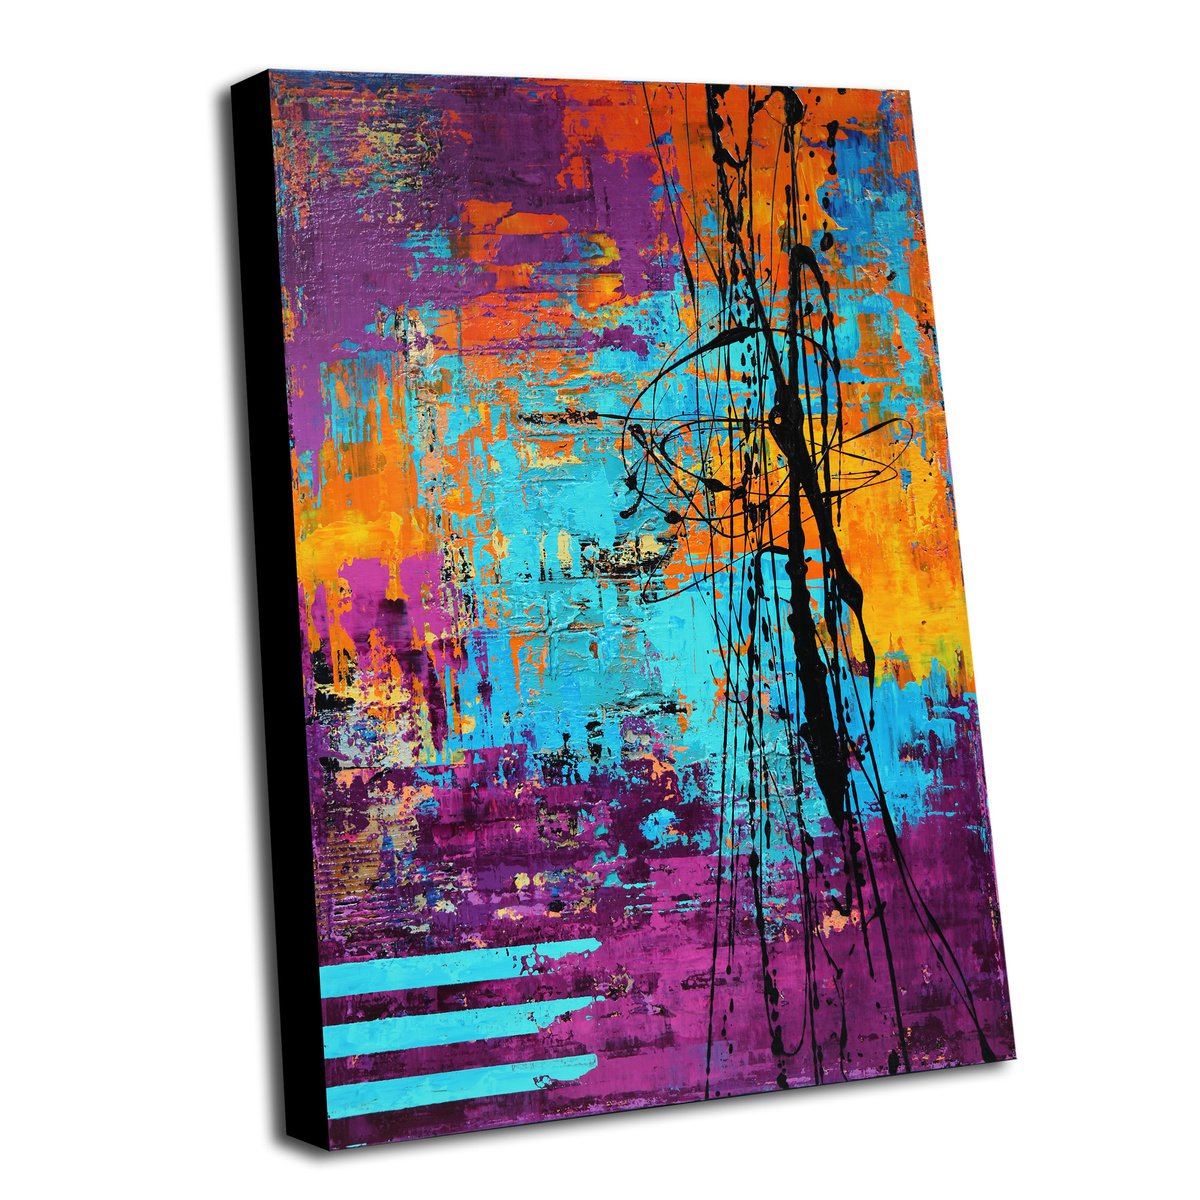 BEDLAM - 120 X 80 CMS - ABSTRACT PAINTING TEXTURED * BLUE * ORANGE * BURGUNDY by Inez Froehlich